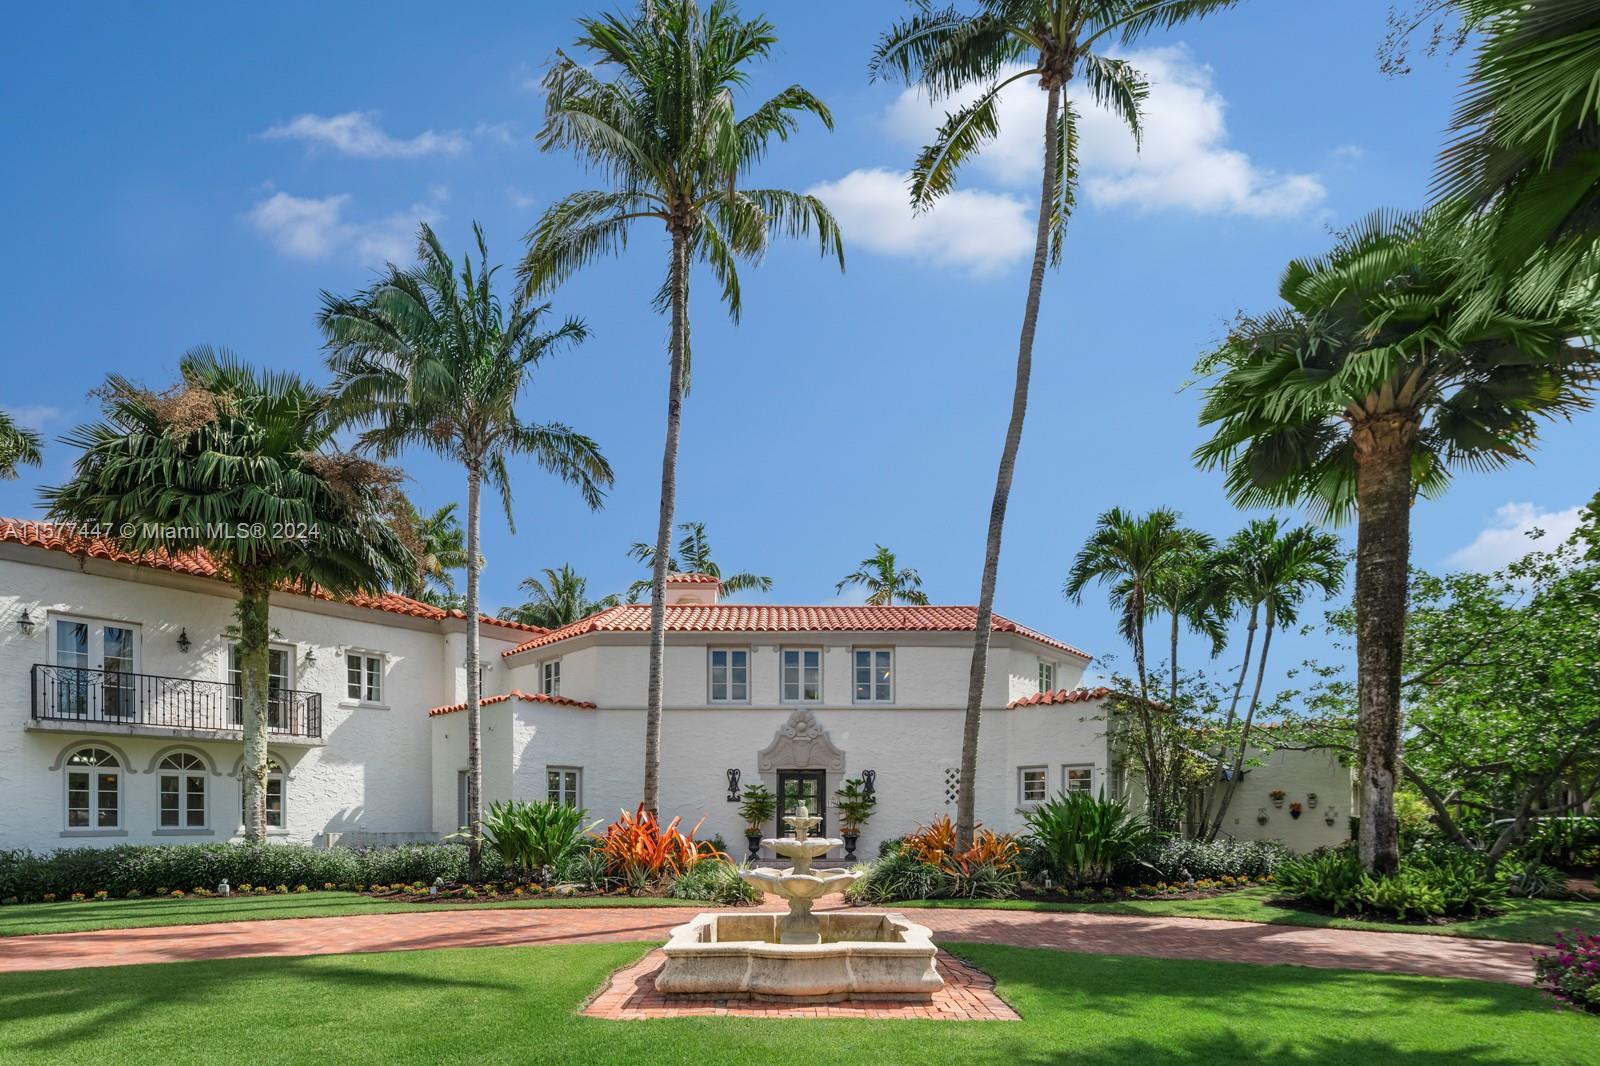 This elegant two-story 1924 Old Spanish is the epitome of quintessential living on one of Coral Gables' most prestigious street addresses. This architectural gem designed by Kiehnel & Elliot exemplifies the pinnacle of Mediterranean Revival Artistry.  Situated on a 20,645 SF lot right in front of the iconic Biltmore Hotel, the tropical lush landscaping offers immense privacy and a serene atmosphere. The grand foyer overlooks the award-winning pool. 1st floor features 2 bedrooms, 2 baths, renovated eat-in kitchen with Quartzite countertops, formal dining, living room & media room. 2nd floor features 4 bedrooms, den & large primary suite and bath with built-in sauna, and covered balcony. Home has newer electrical, plumbing, new roof, impact windows/doors throughout.